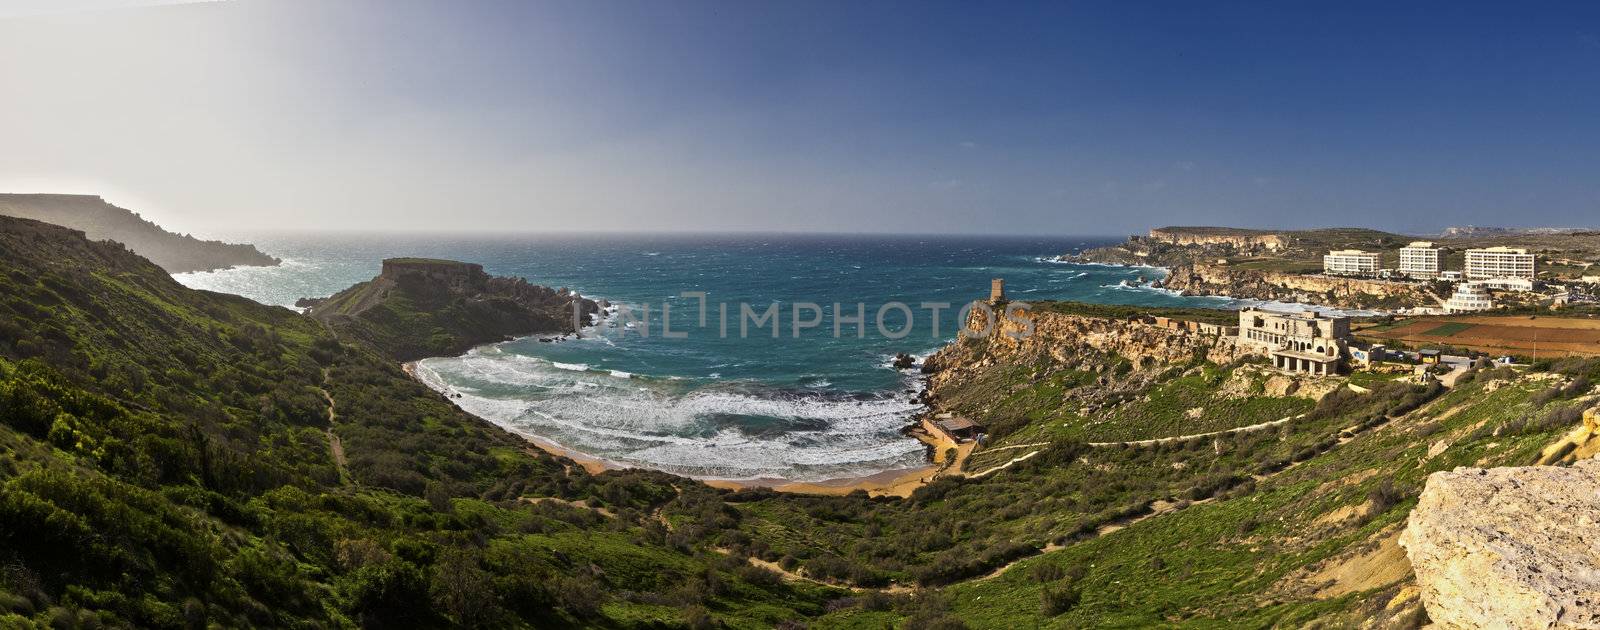 Panoramic view of Ghajn Tuffieha Bay.  One of the most beautiful and idyllic beaches on the island of Malta,it is surrounded by unique scenery and is an area of high ecological importance